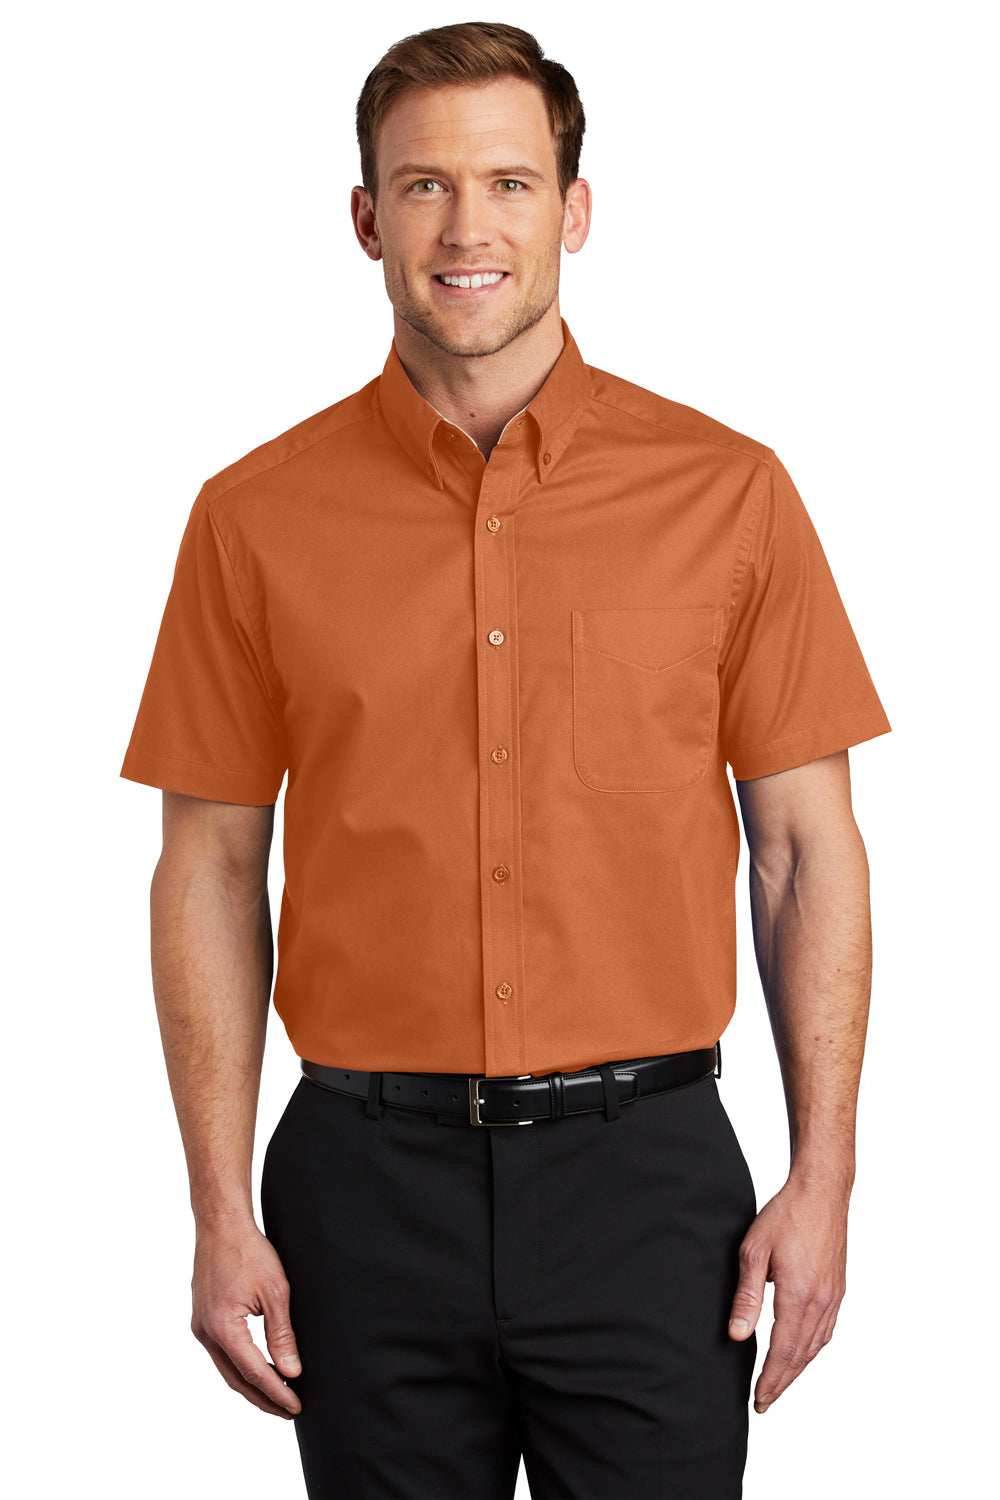 Port Authority S508/TLS508 Mens Easy Care Wrinkle Resistant Short Sleeve Button Down Shirt w/ Pocket Texas Orange Front